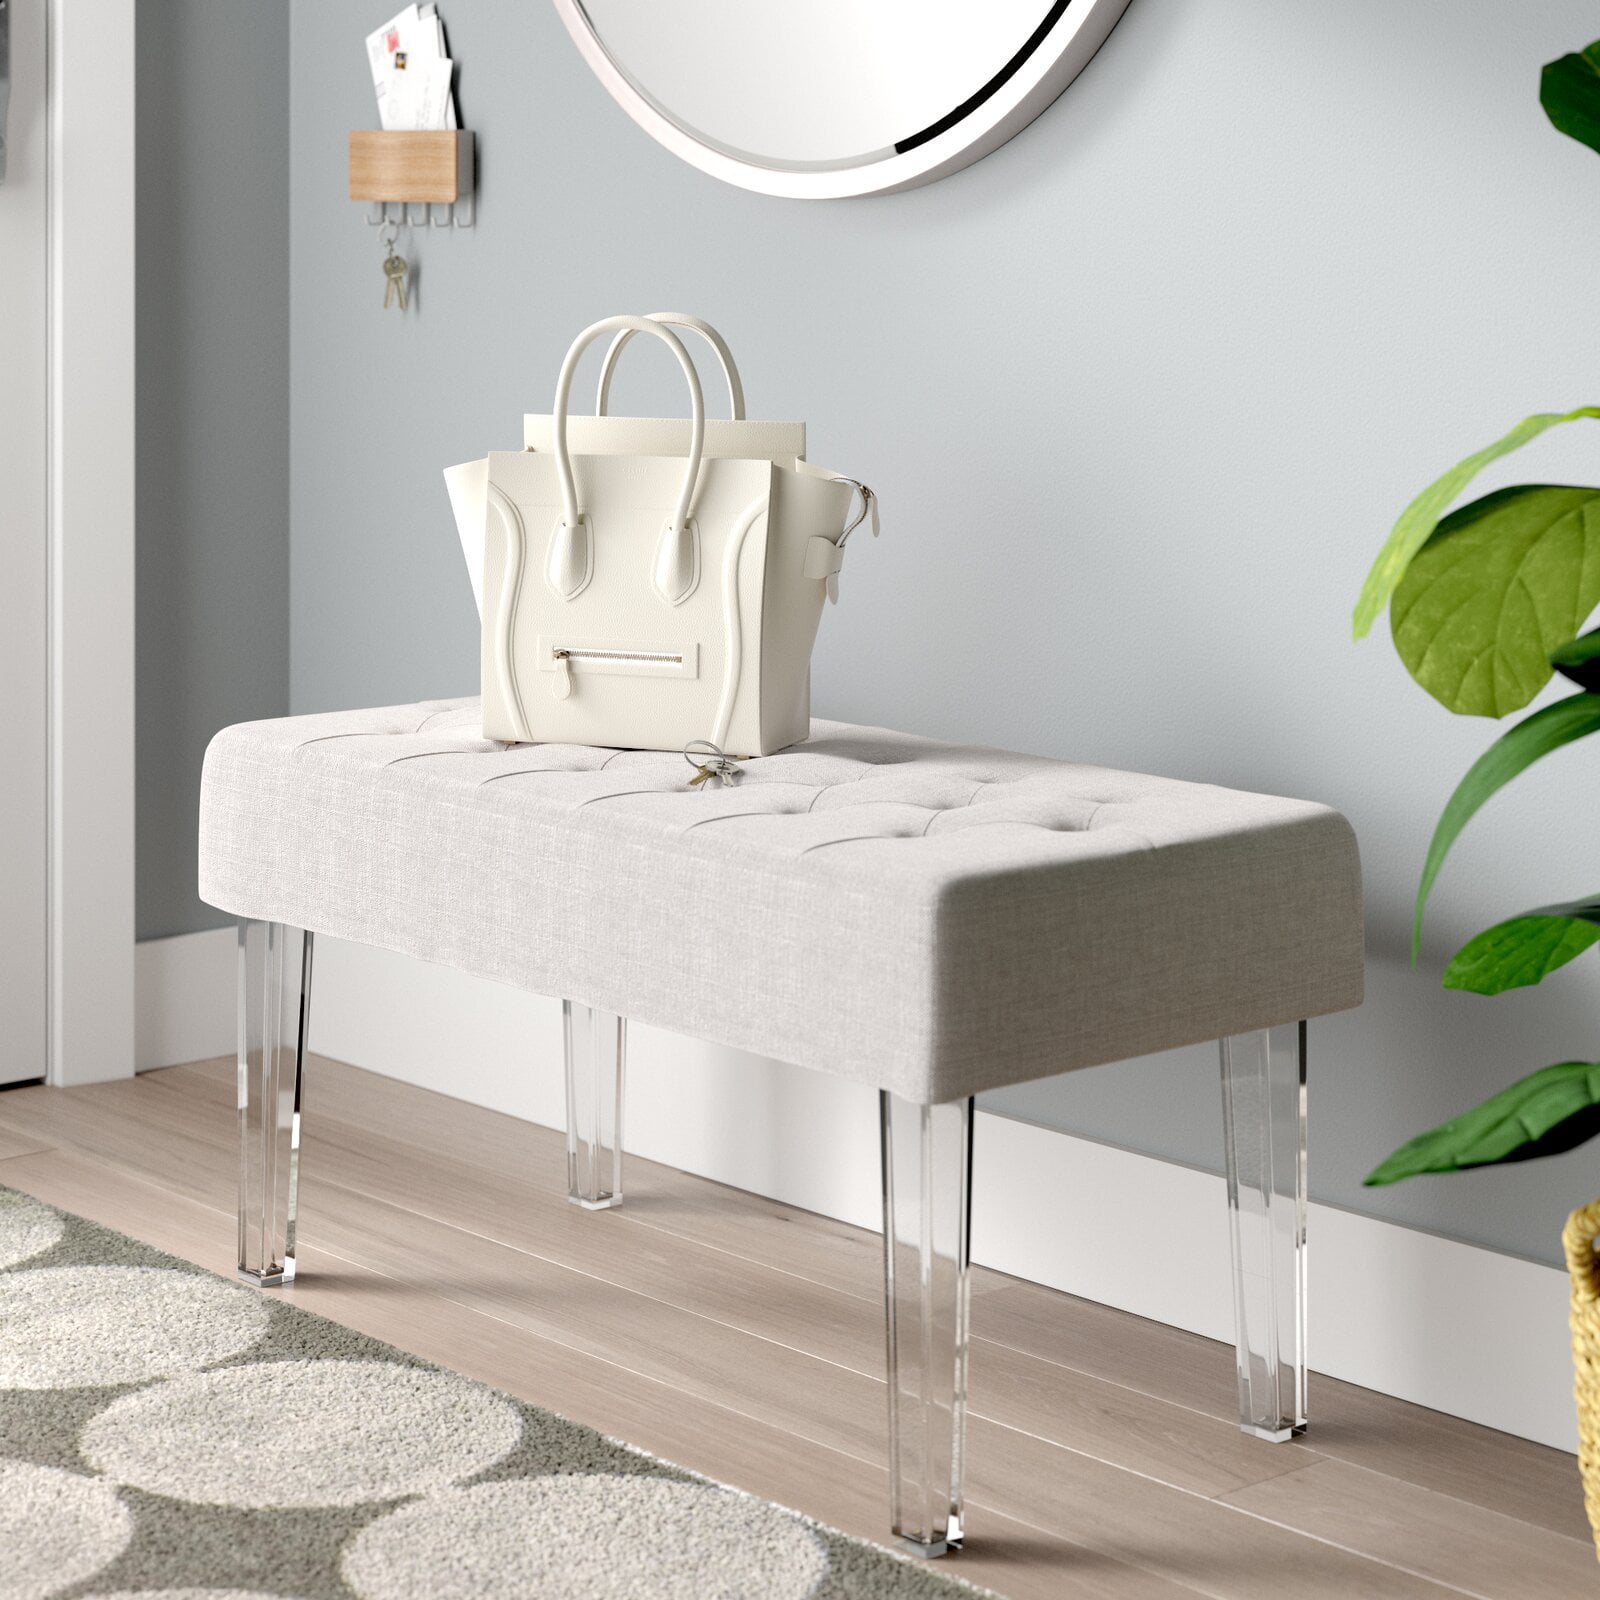 Entry Way Bench Wood Shoe Bench with Storage HOME BI Shoe Rack Bench White Storage Benches with Light Grey Cushion Upholstery for Living Room Bedroom and Hallway Garage 